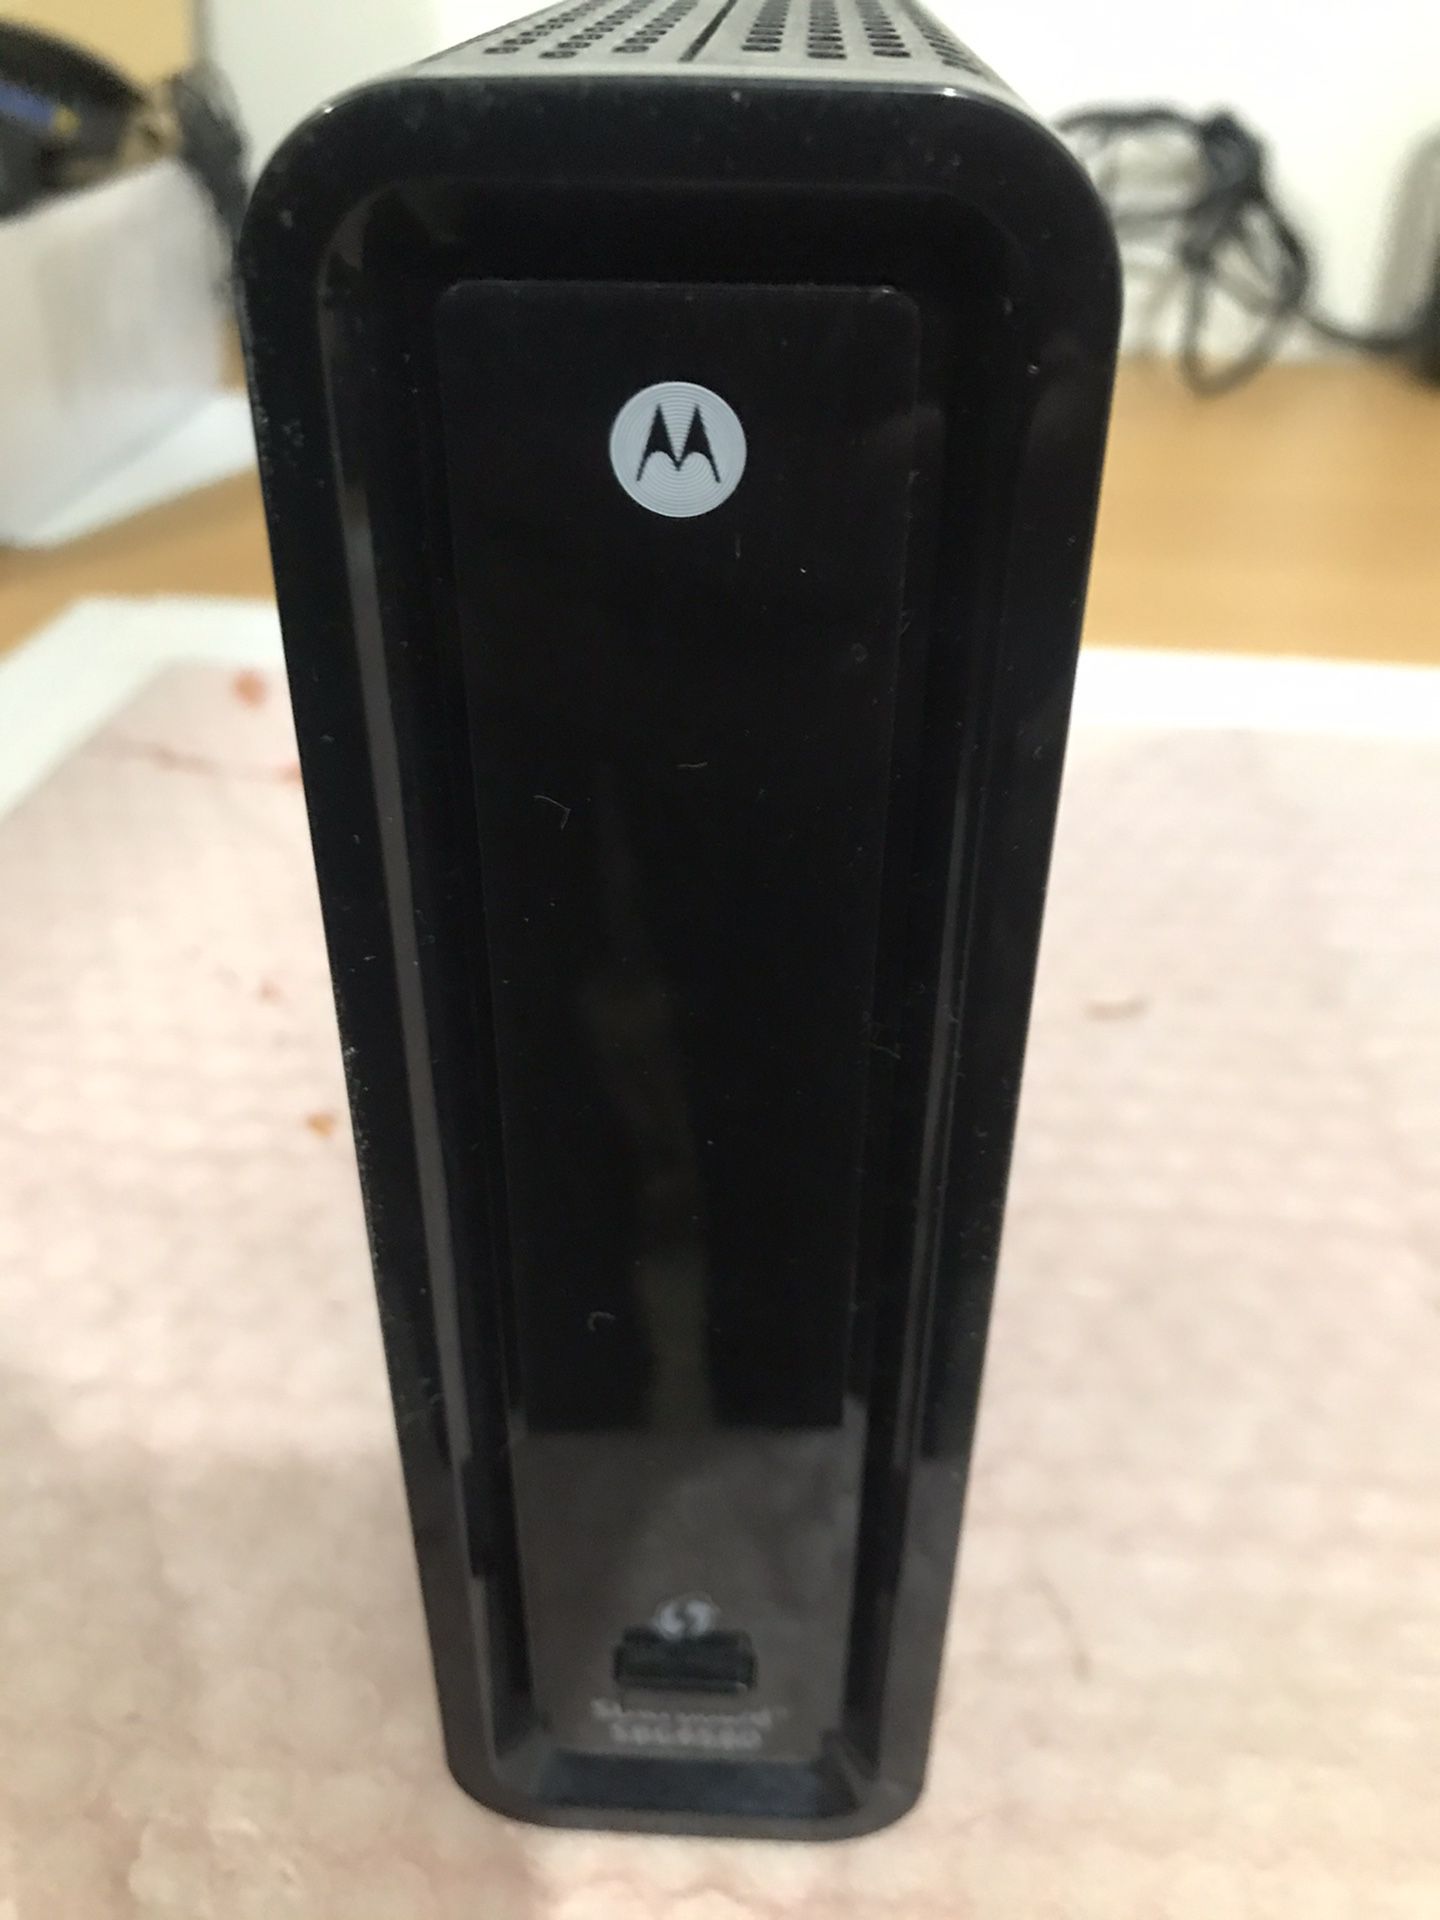 Cable wireless router modem